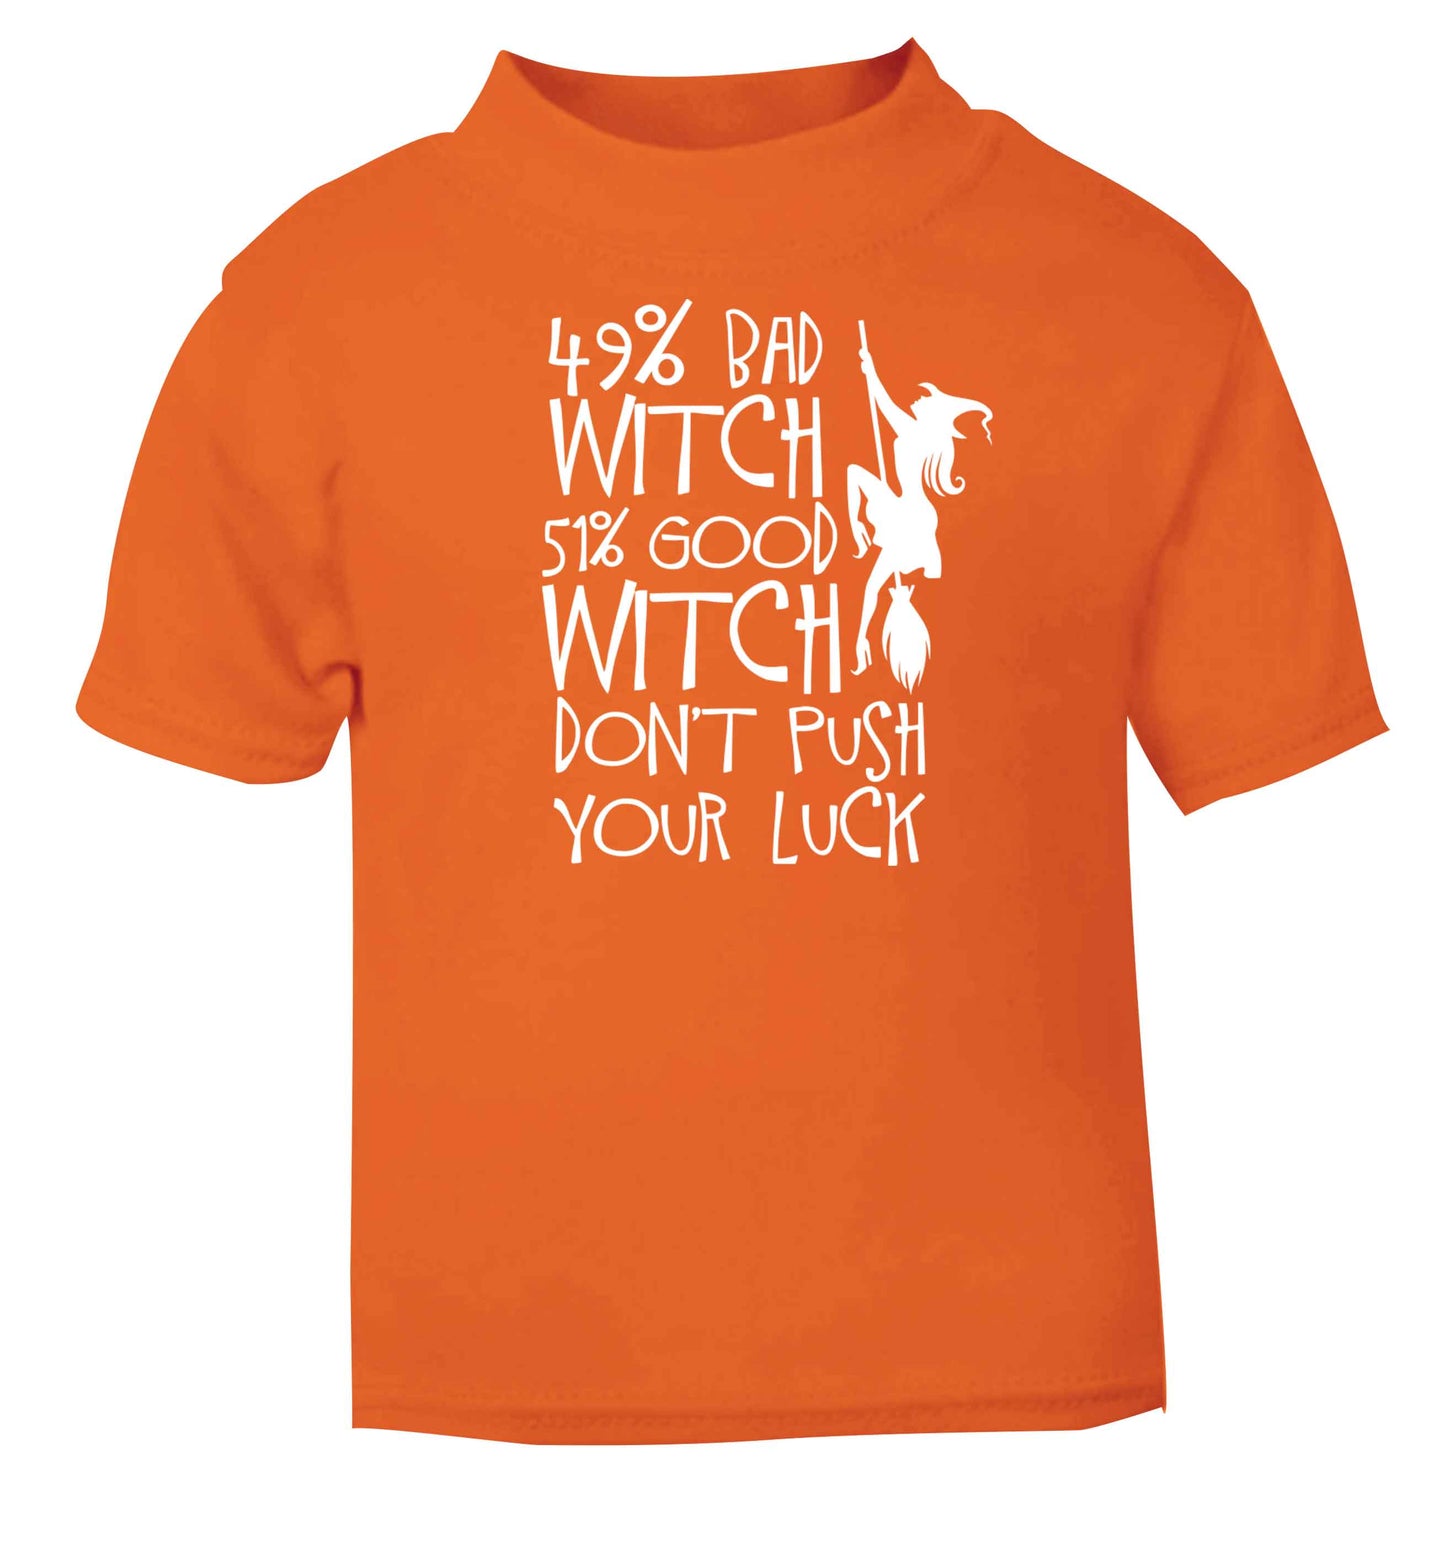 49% bad witch 51% good witch don't push your luck orange baby toddler Tshirt 2 Years